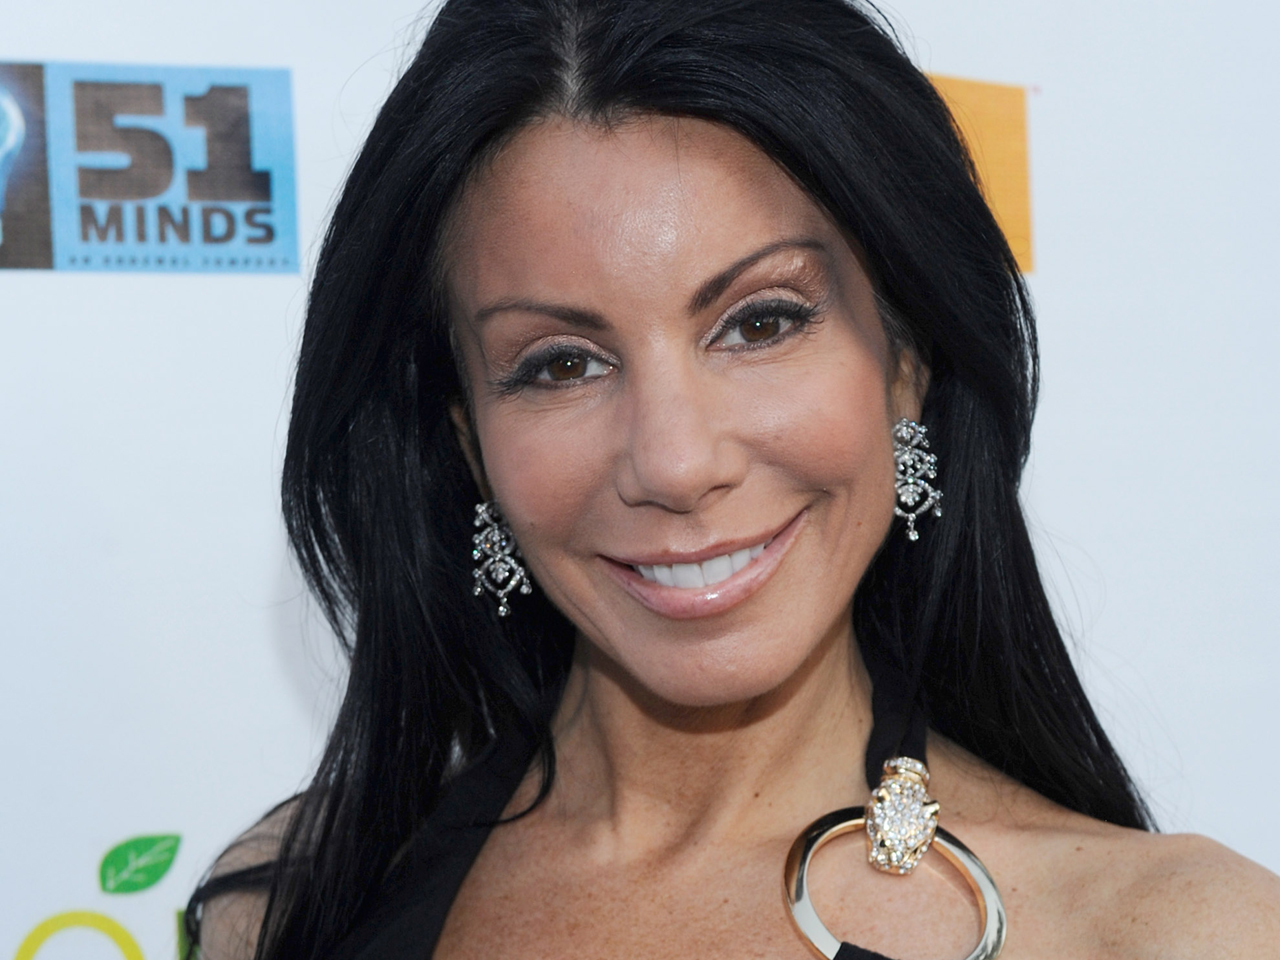 Danielle Staub: Did you miss her on 